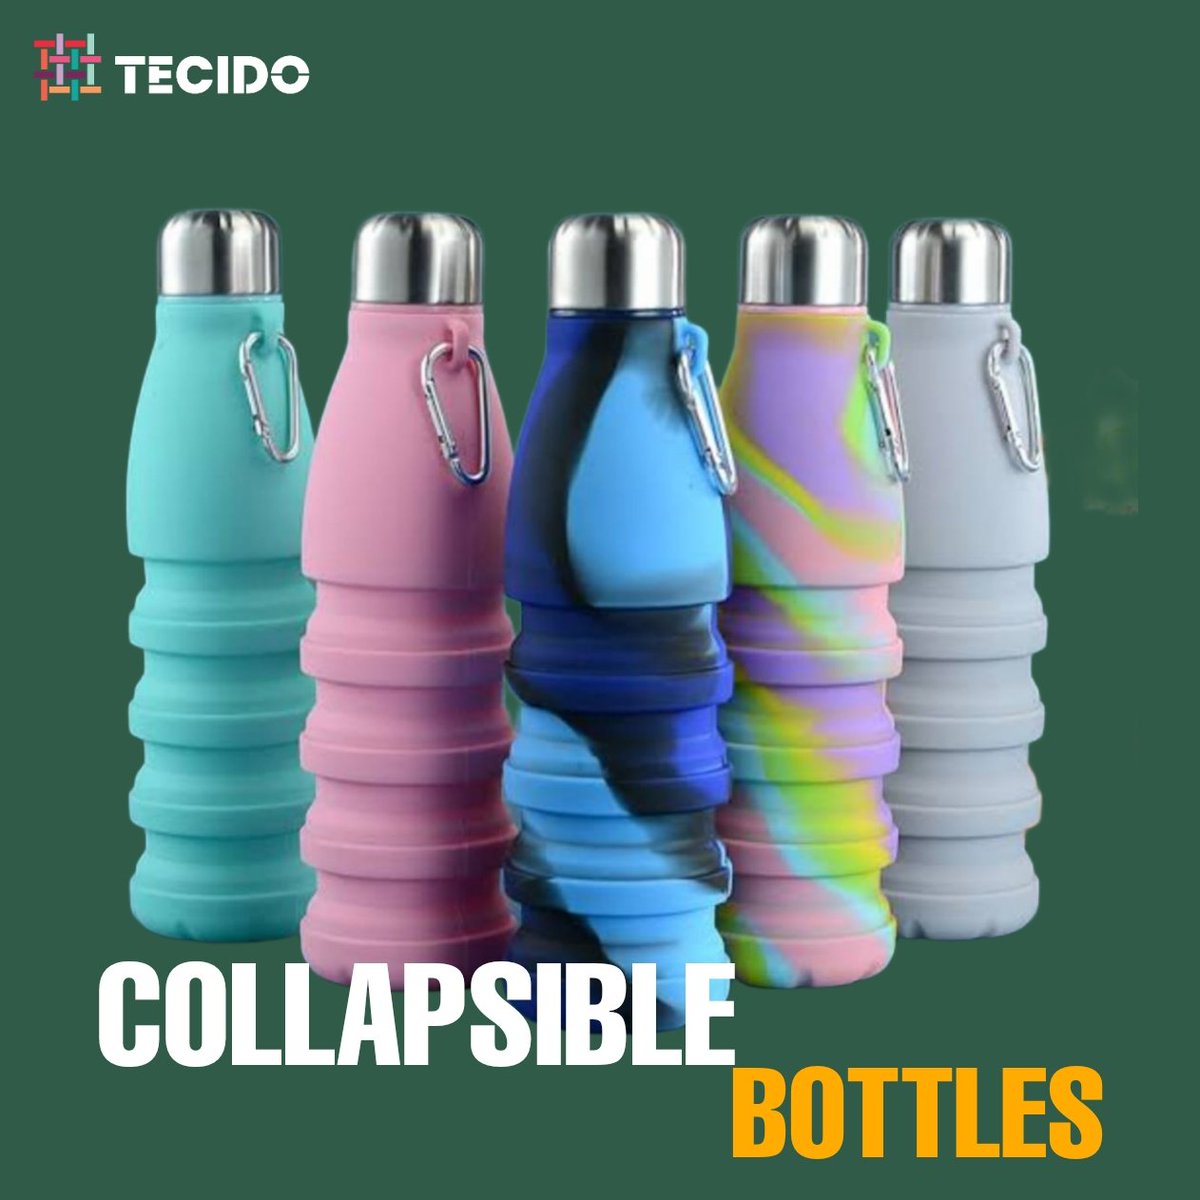 Revolutionize hydration on the go with collapsible bottle. Stay hydrated wherever you are with style and convenience.

#corporategifting #employeeappreciation #employeeengagement #employeebenefits #teambuilding #HydrationInnovation #PortableHydration #OnTheGoEssentials